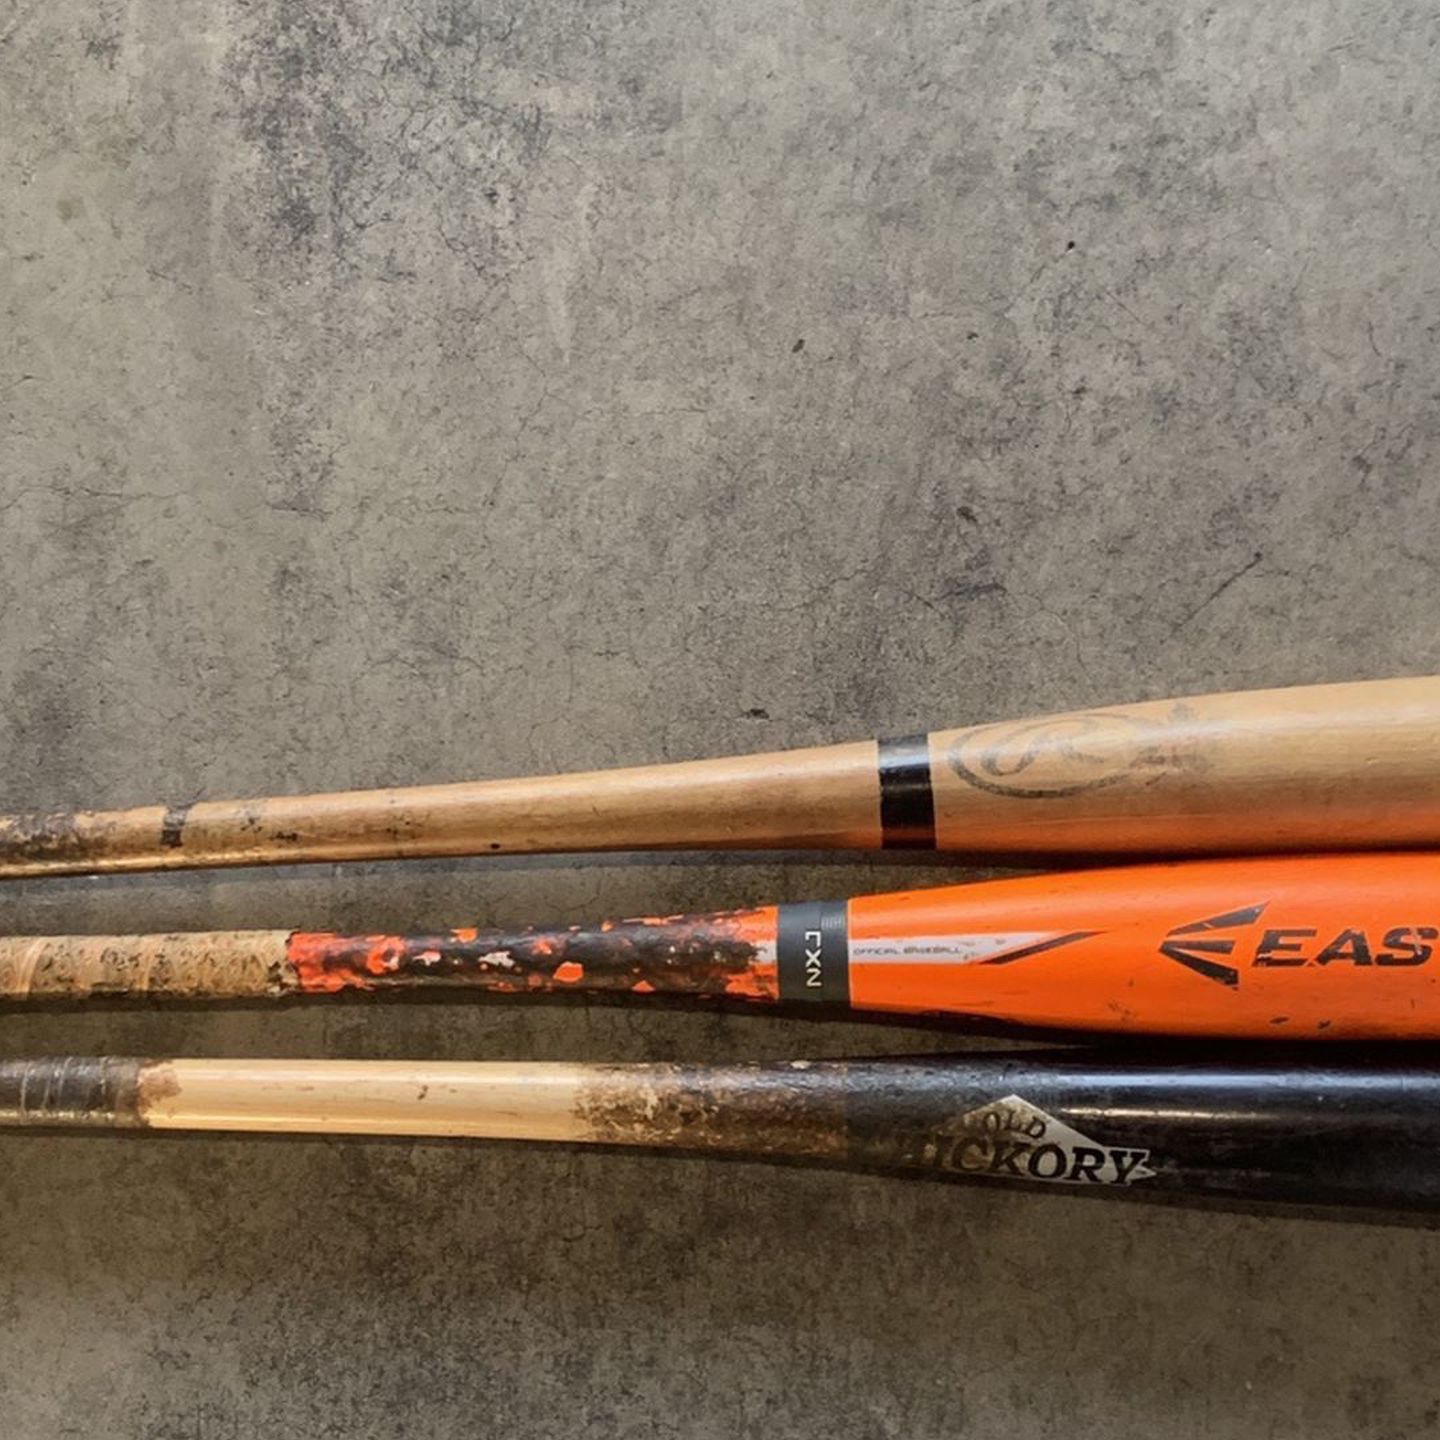 Bbcor, Wood, And -5 Bats For Sale